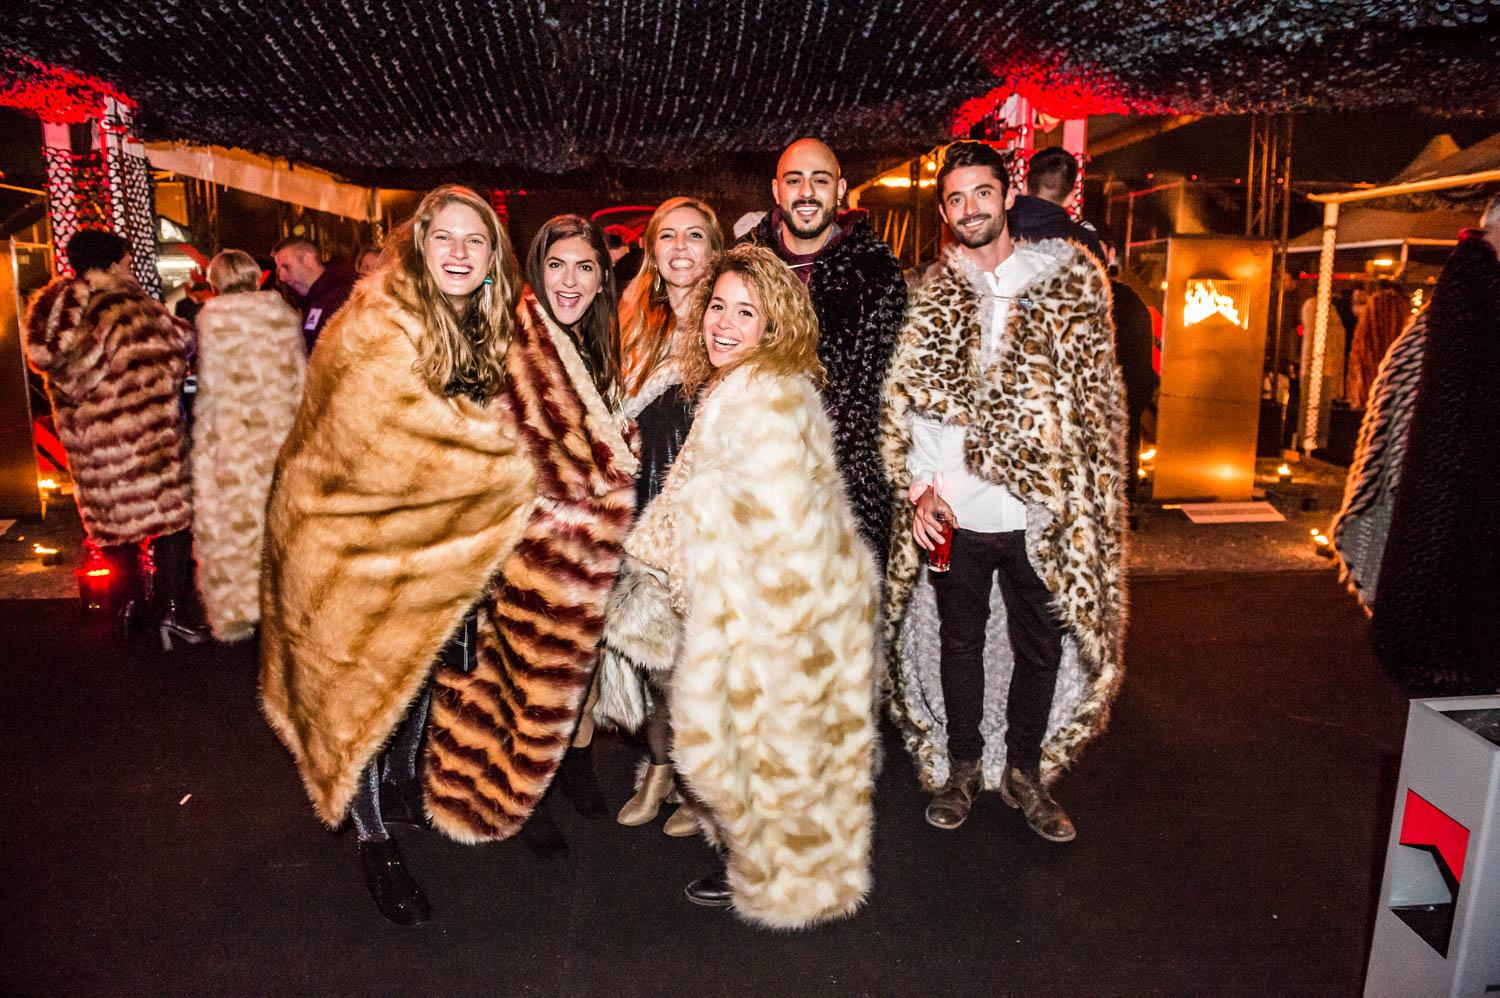 Influencers posing in fake furs as part of an immersive experience for a product launch